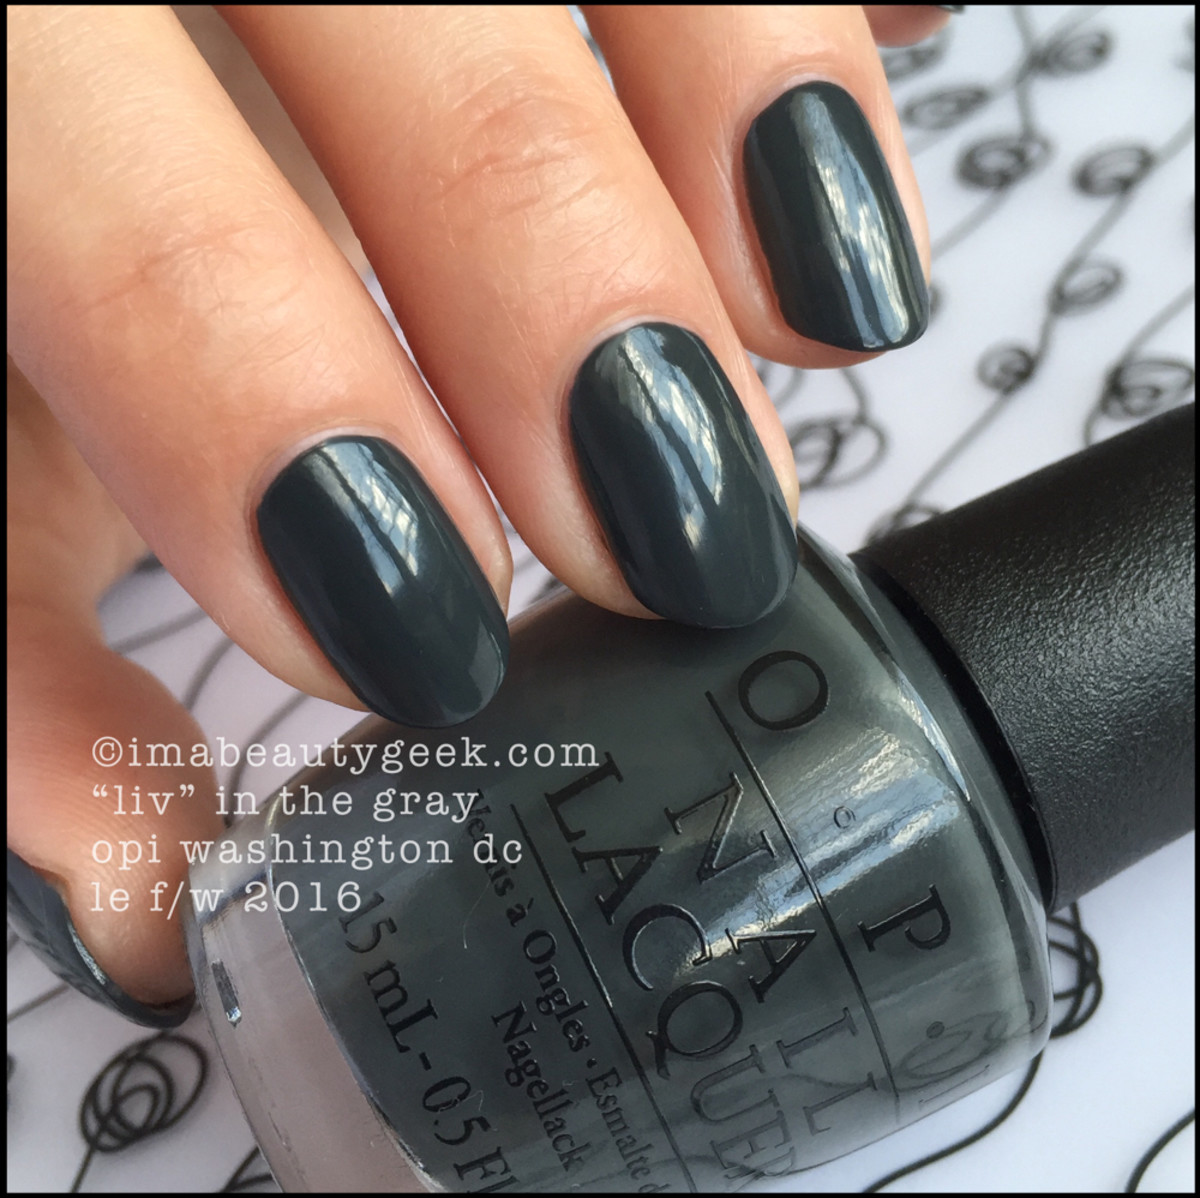 OPI Liv in the Gray_OPI Washington DC Collection 2016 Review Swatches Comparisons